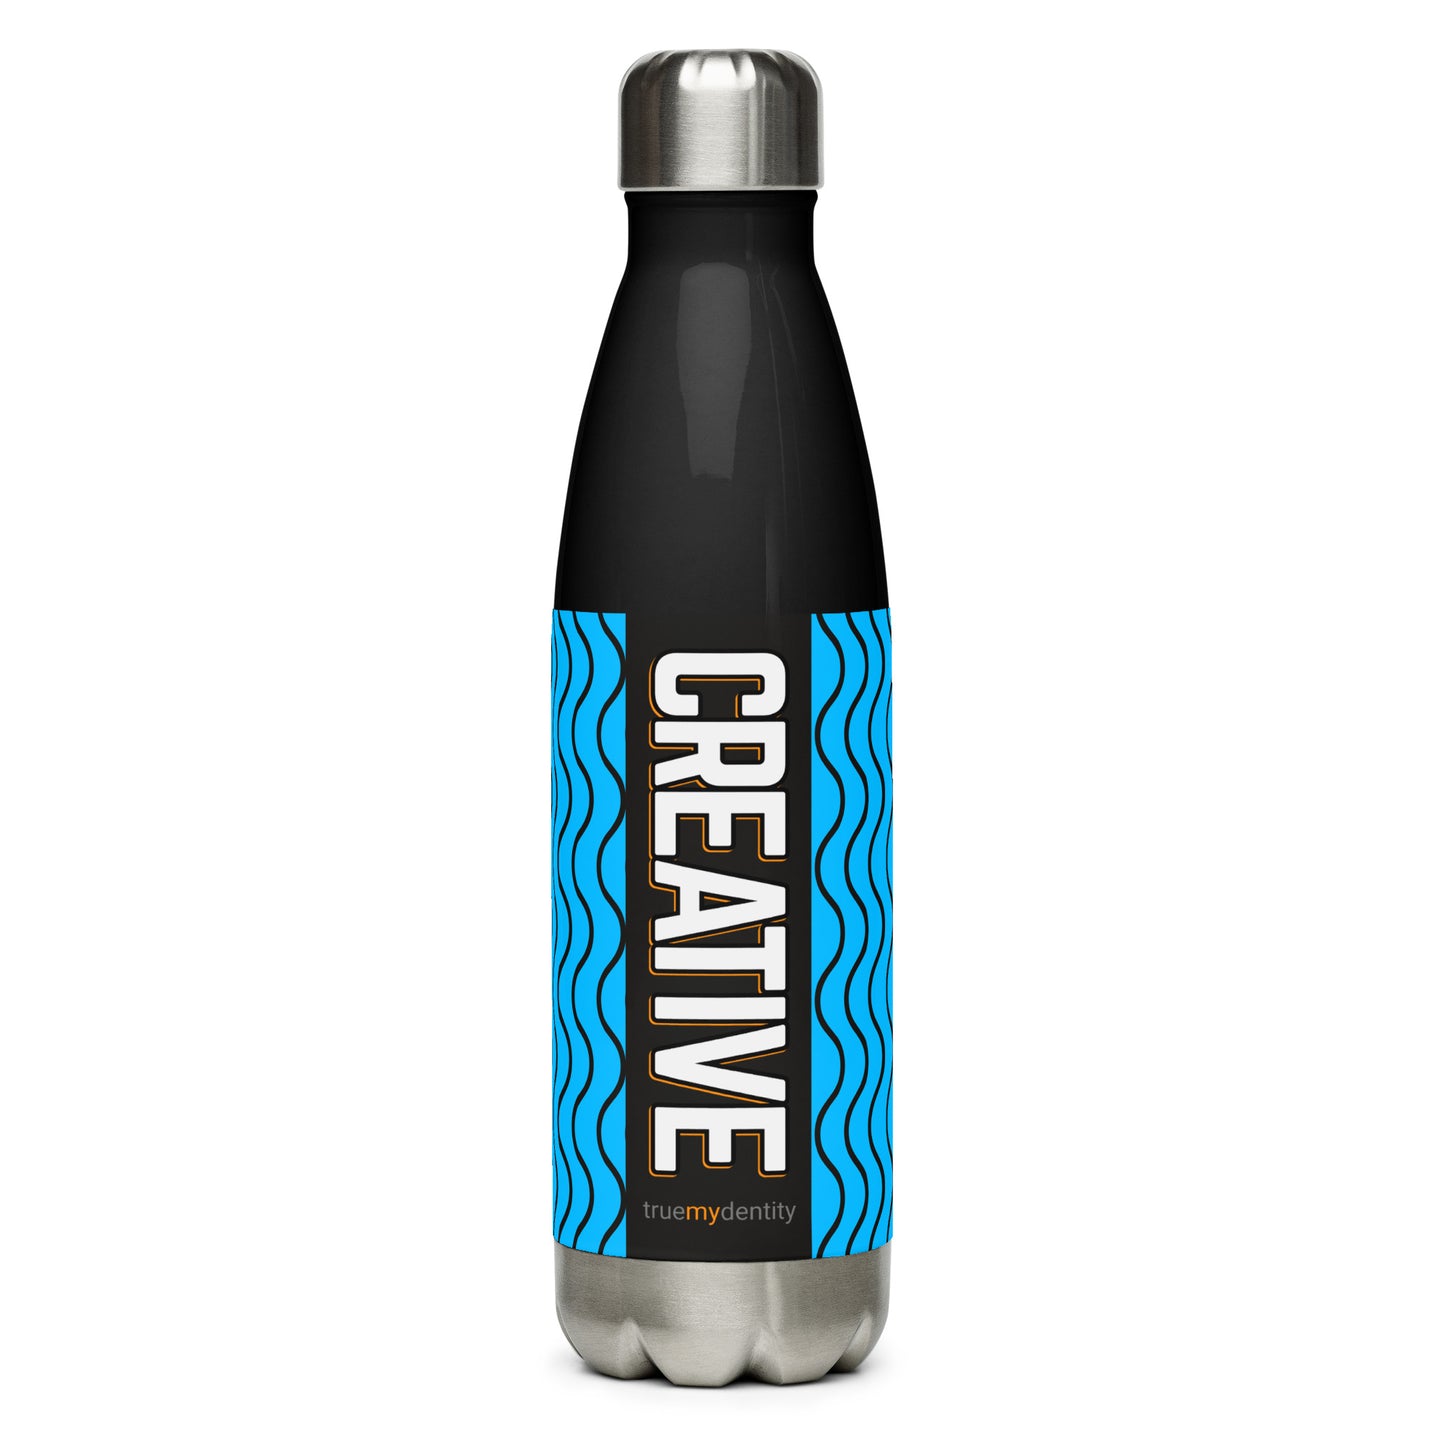 CREATIVE Stainless Steel Water Bottle Blue Wave Design, 17 oz, in Black or White